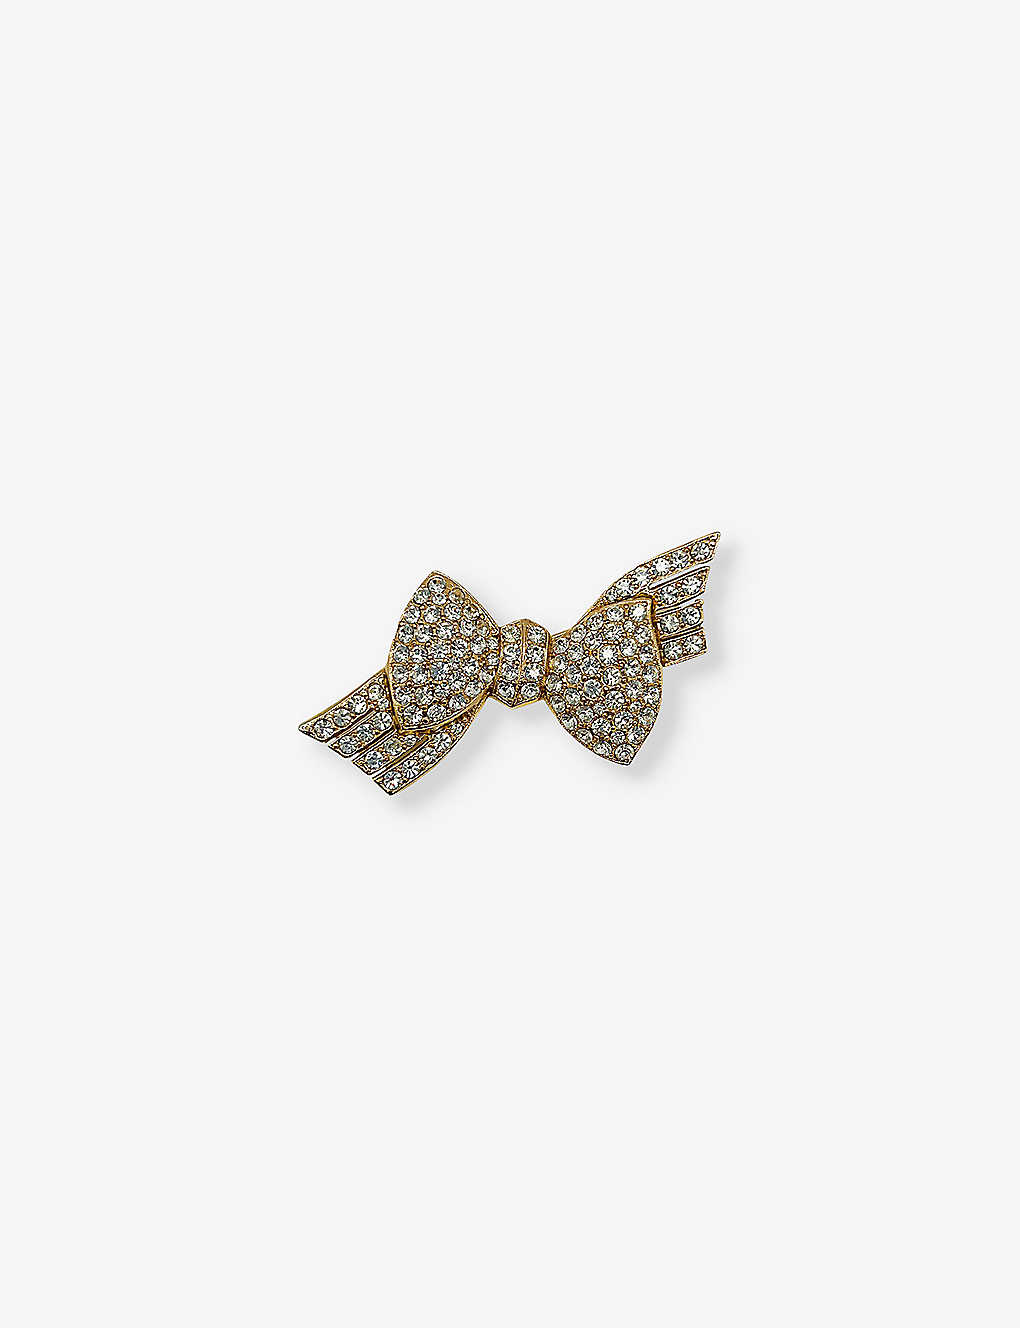 Jennifer Gibson Jewellery Womens Gold White Bow Gold-plated Metal And Crystal Brooch